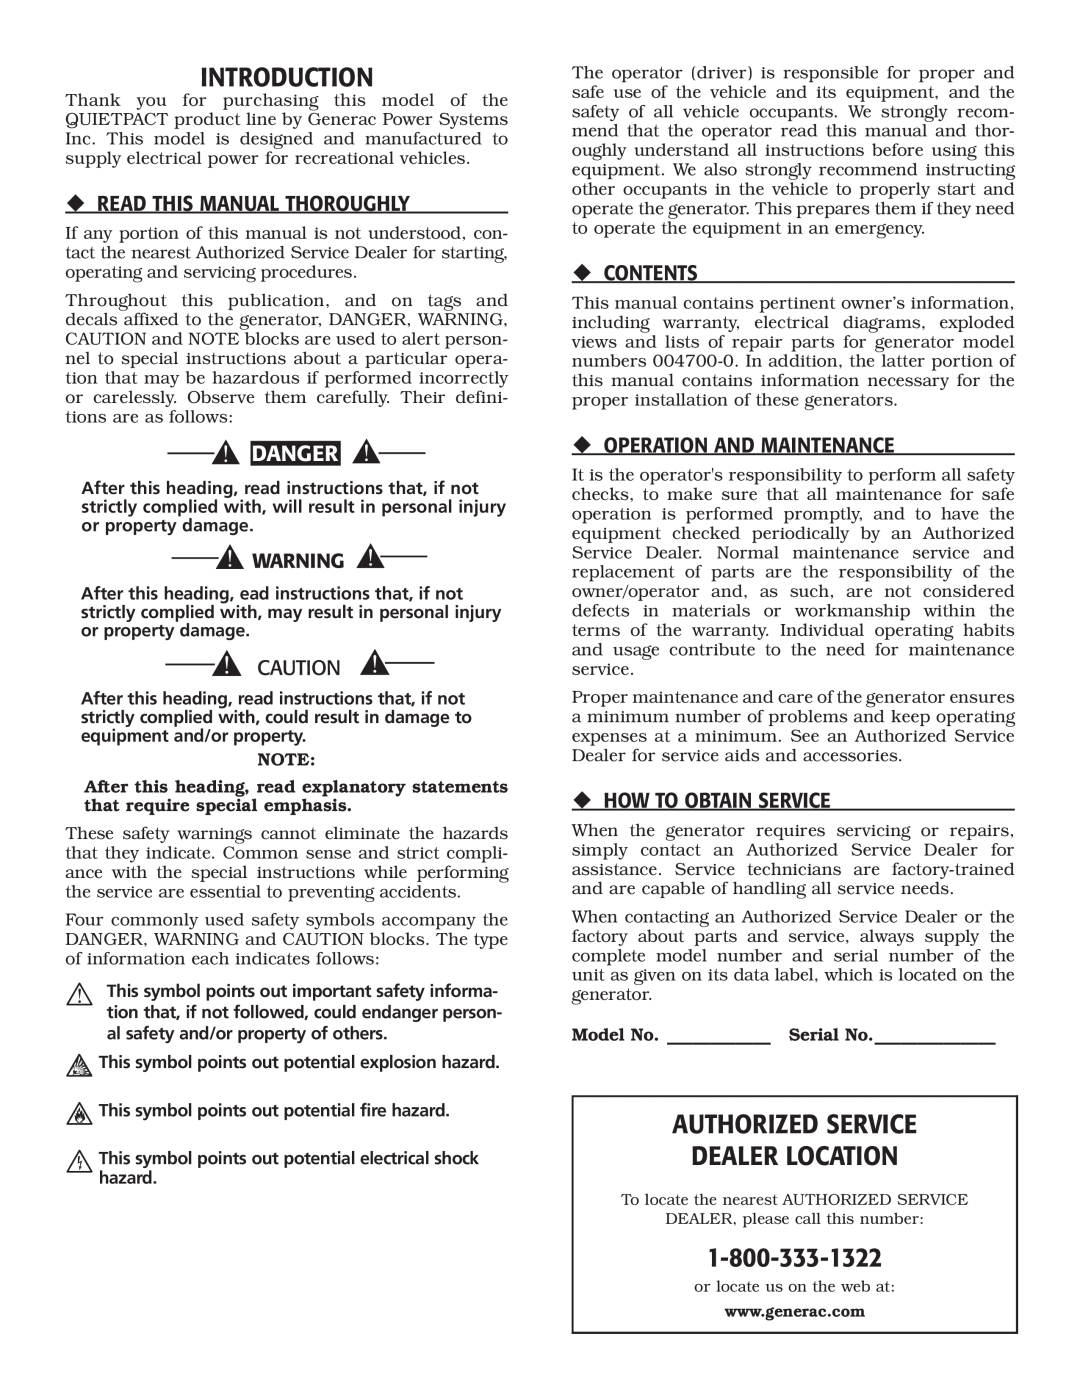 Generac Power Systems 004700-00 Introduction, Authorized Service Dealer Location, ‹ Read This Manual Thoroughly, Danger 